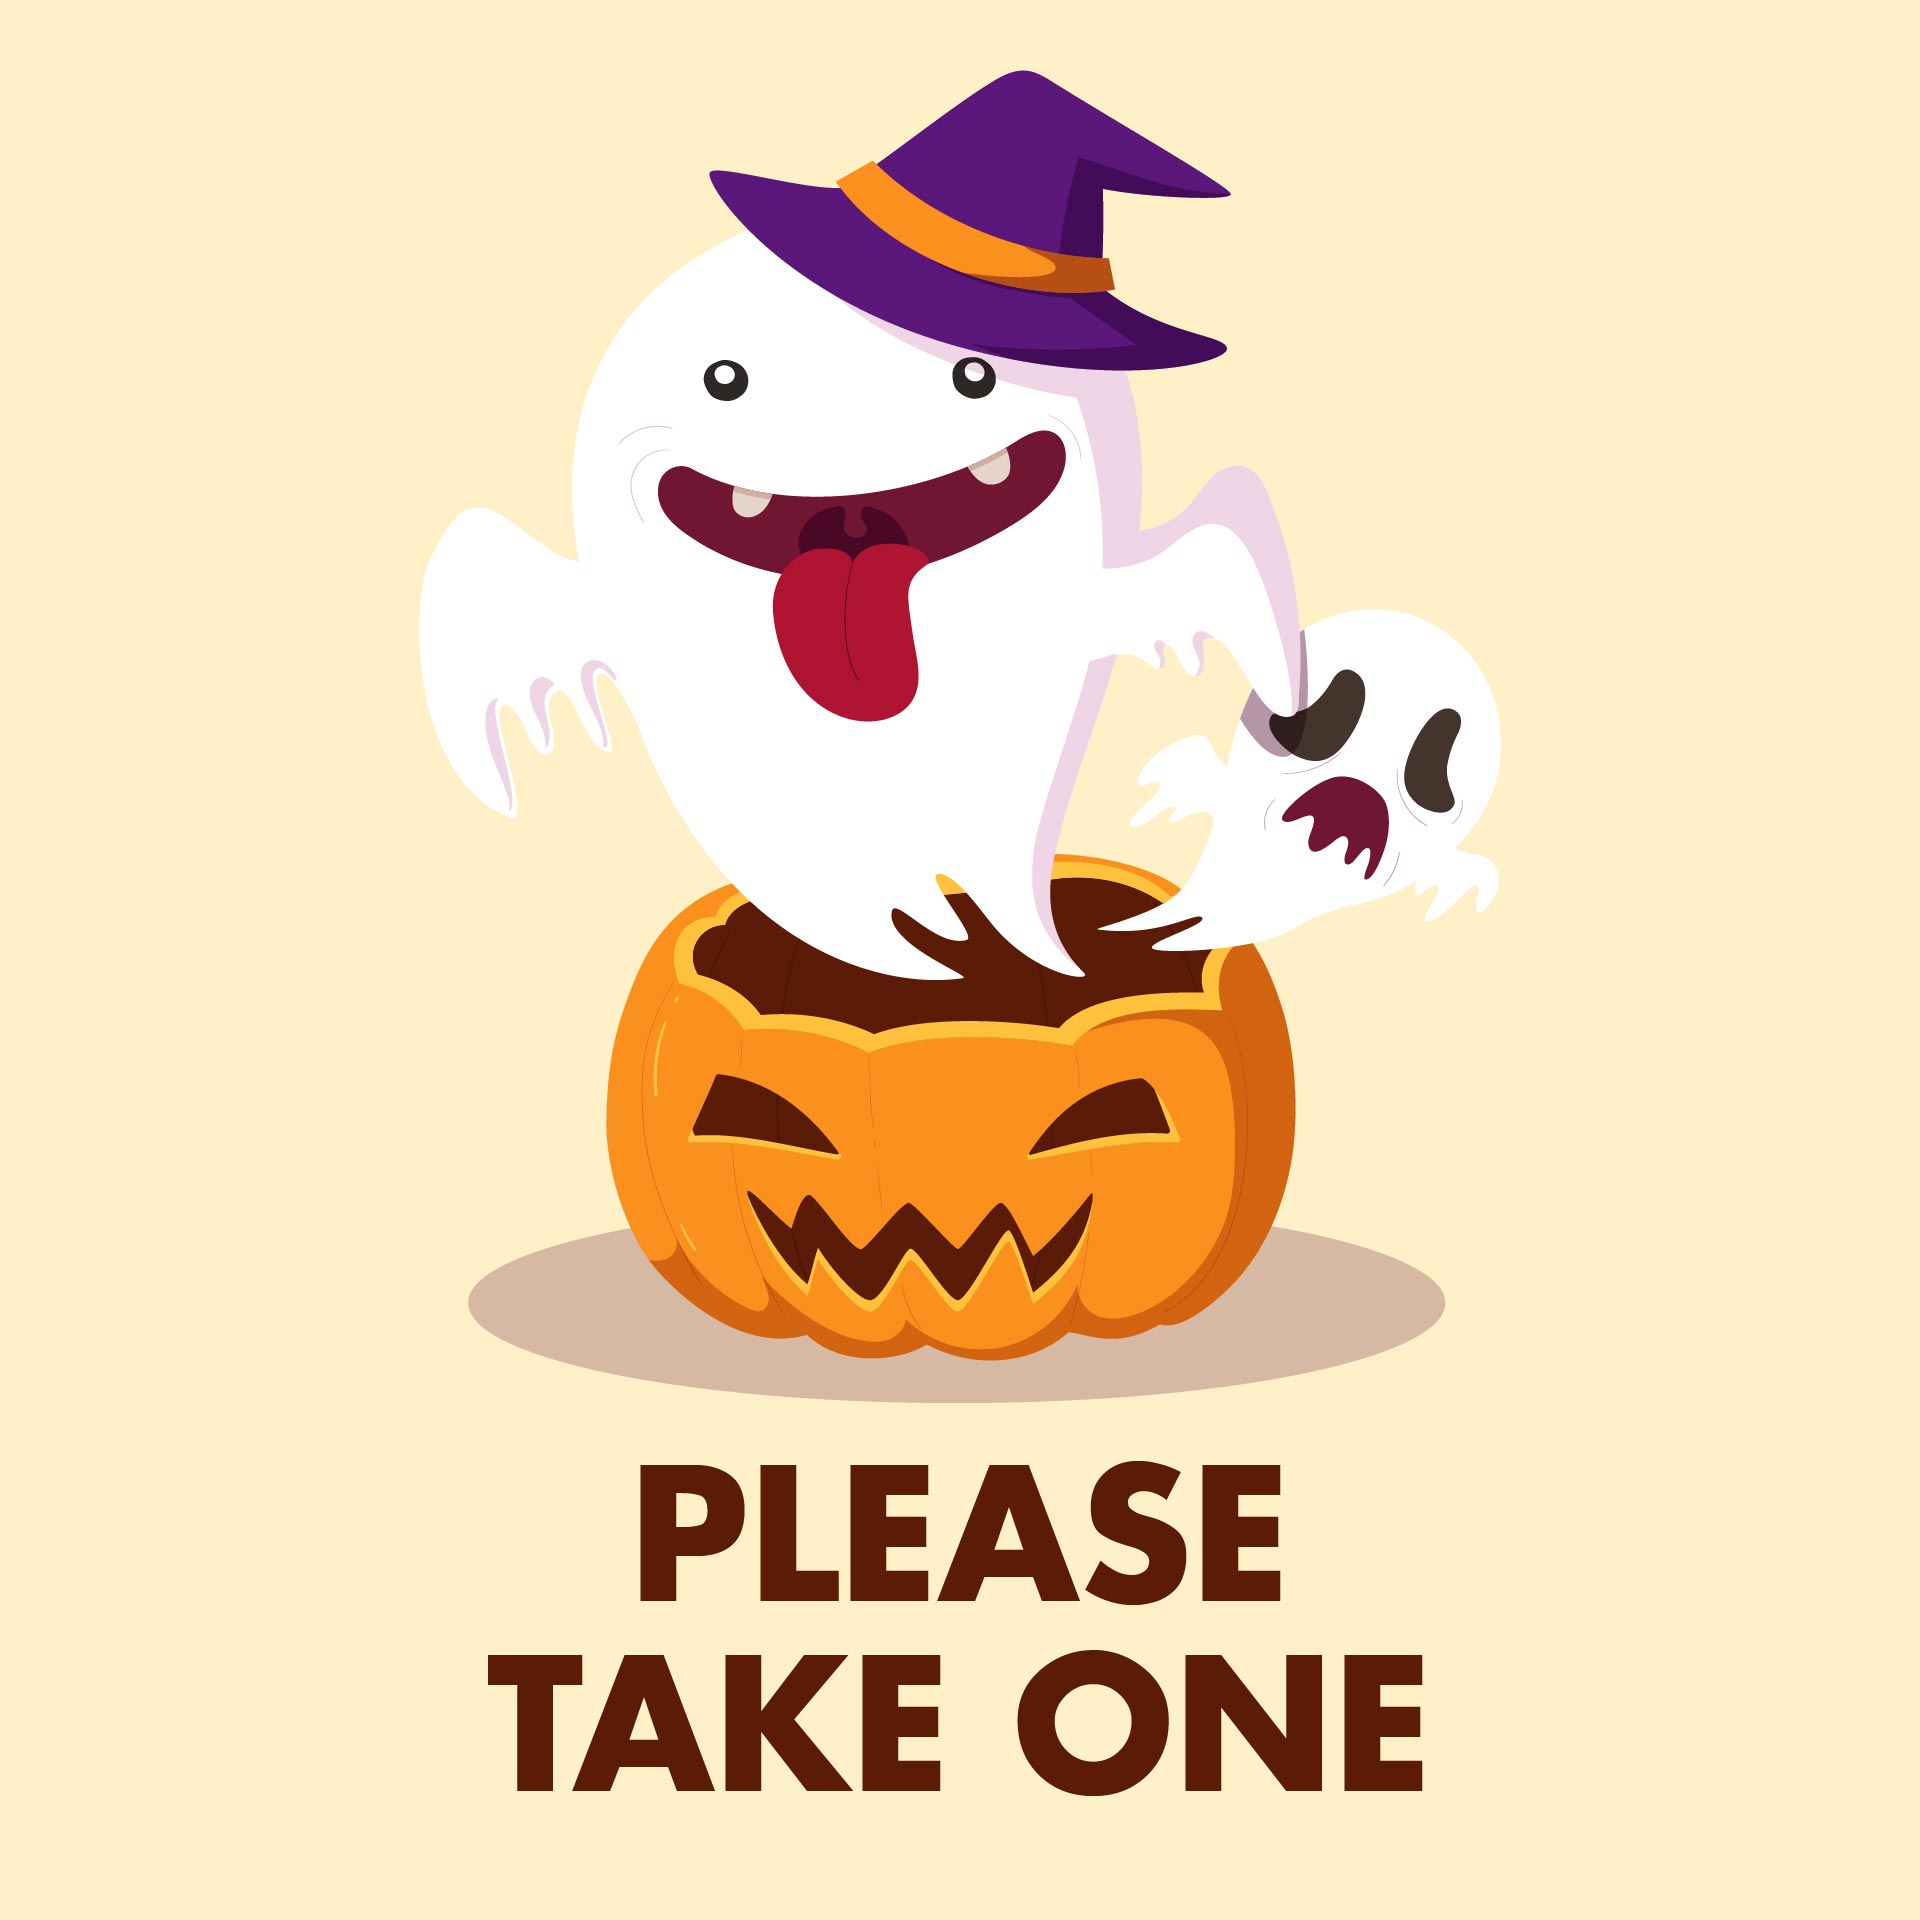 5-best-images-of-halloween-signs-printable-take-2-please-free